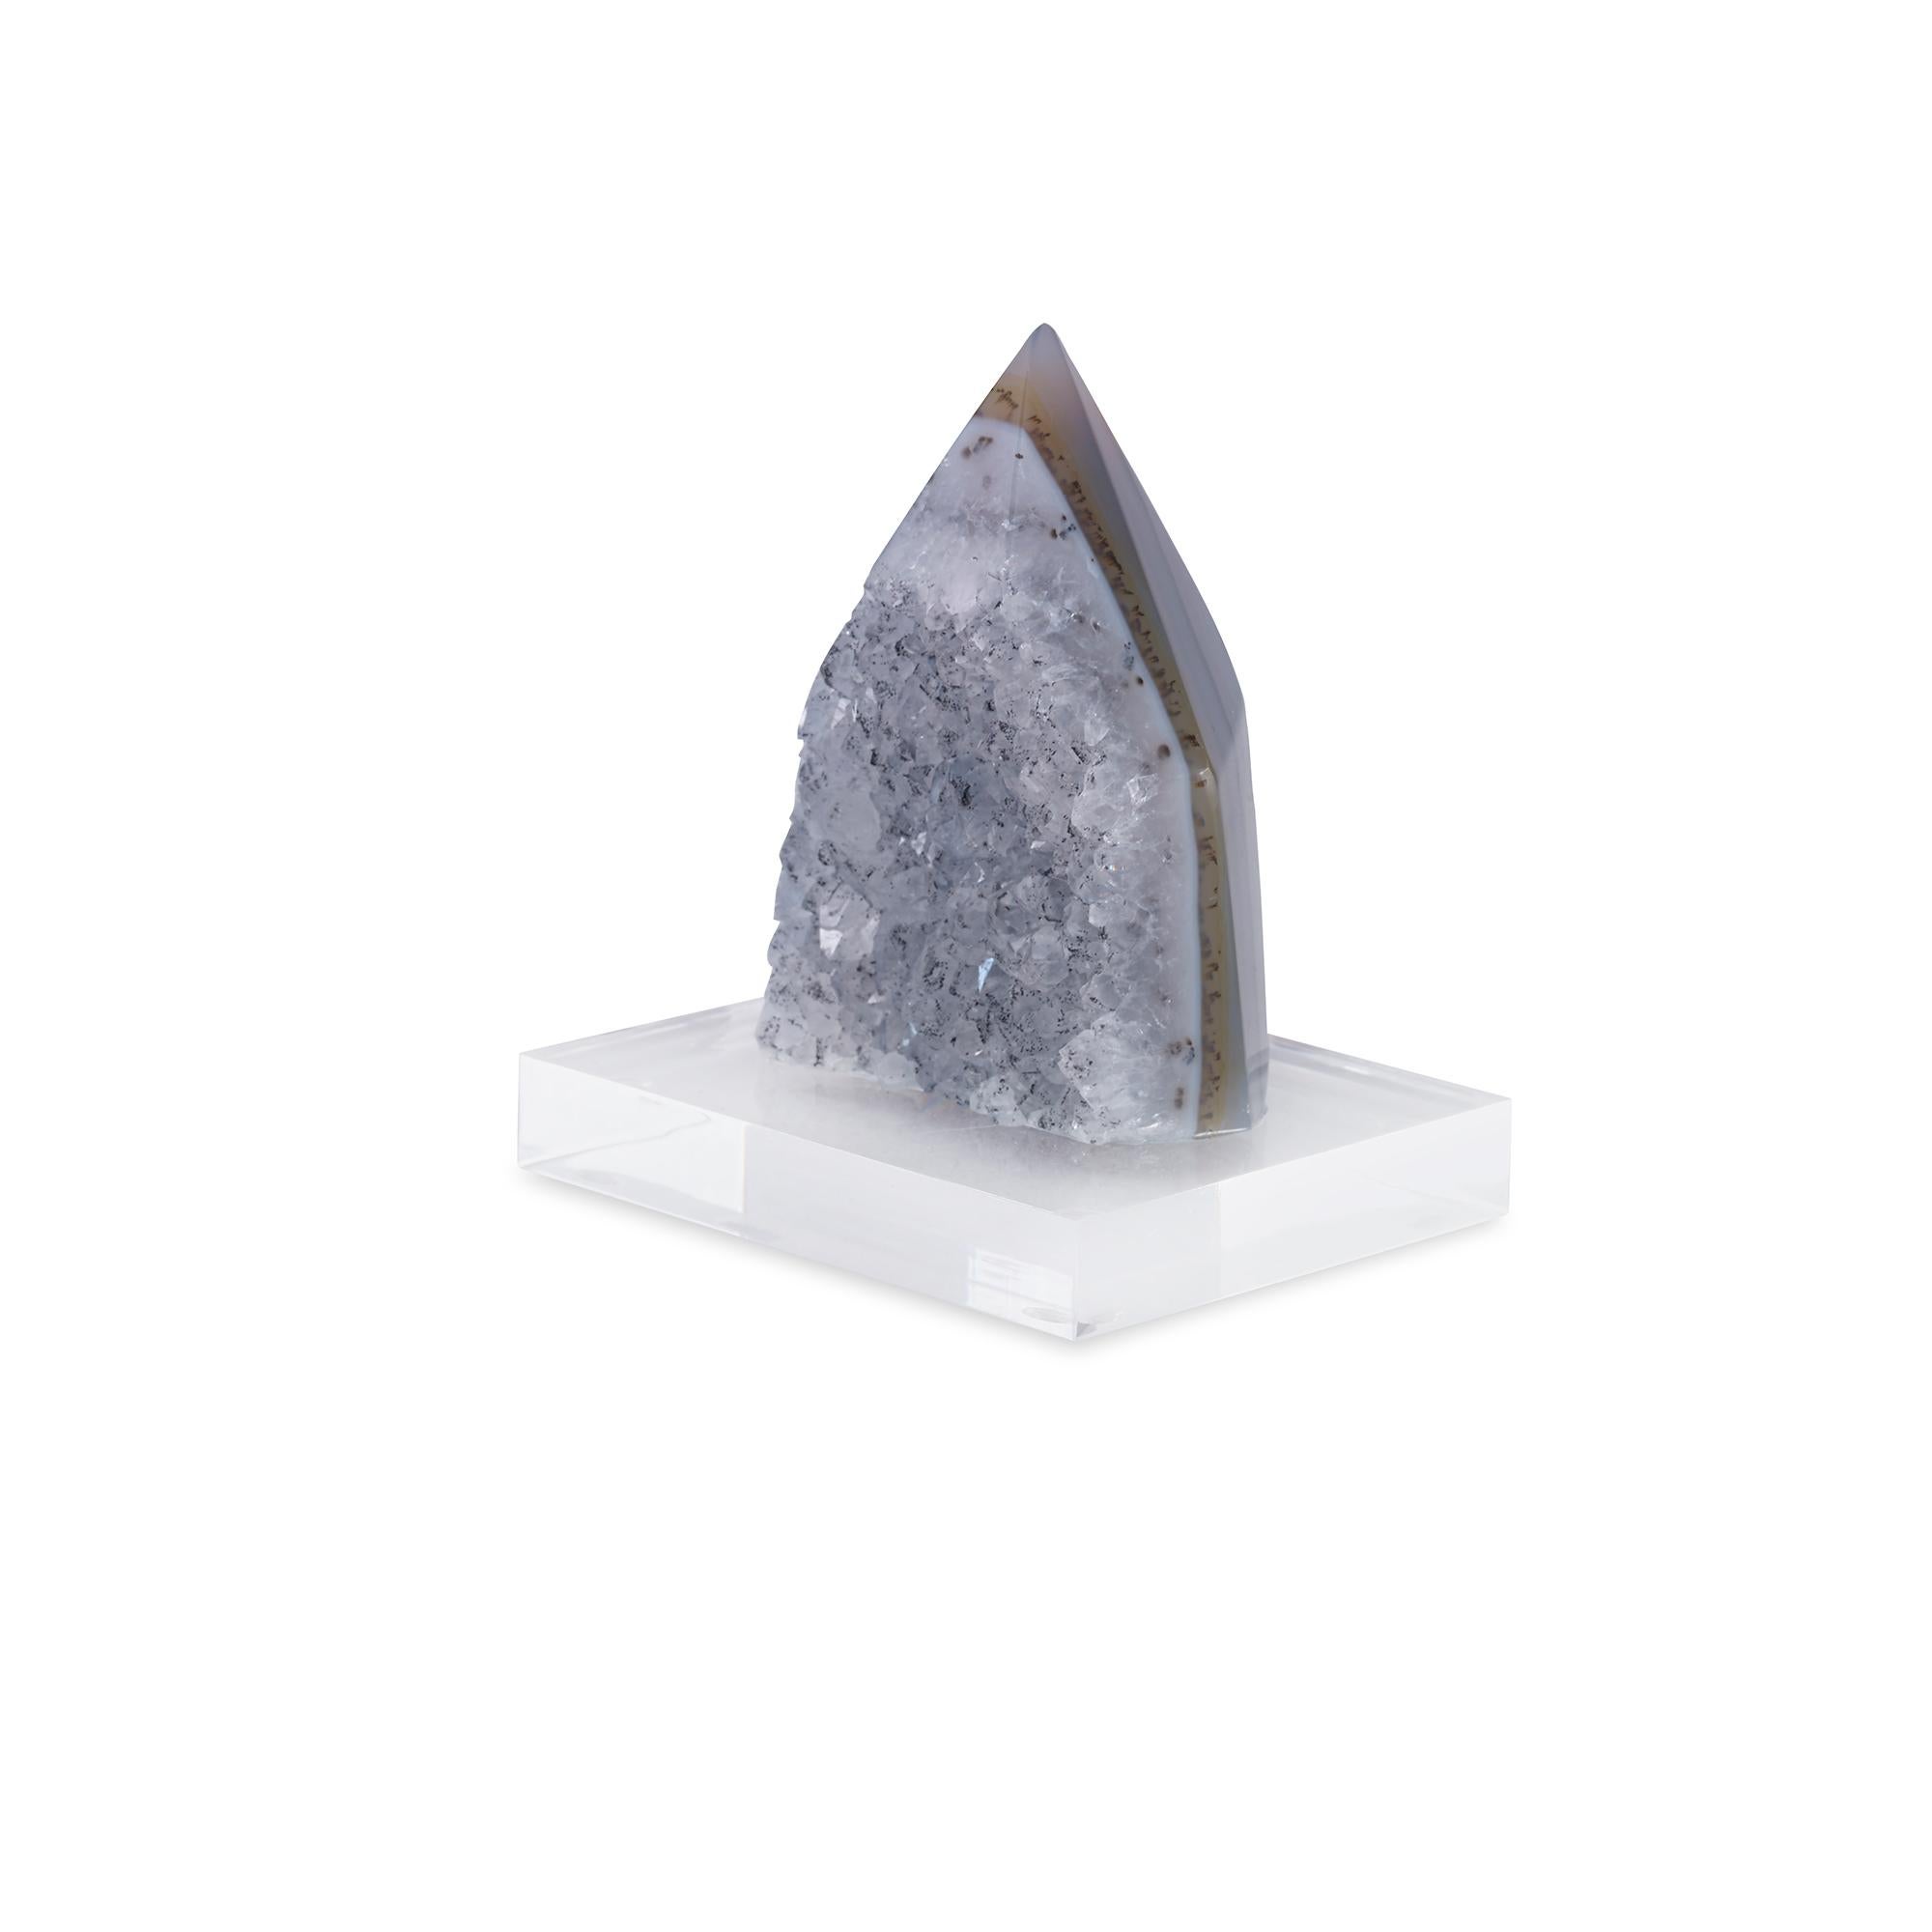 A natural agate duze point mounted on a clear acrylic base. Due to the natural material, variation in size, shape, and color is to be expected.
      